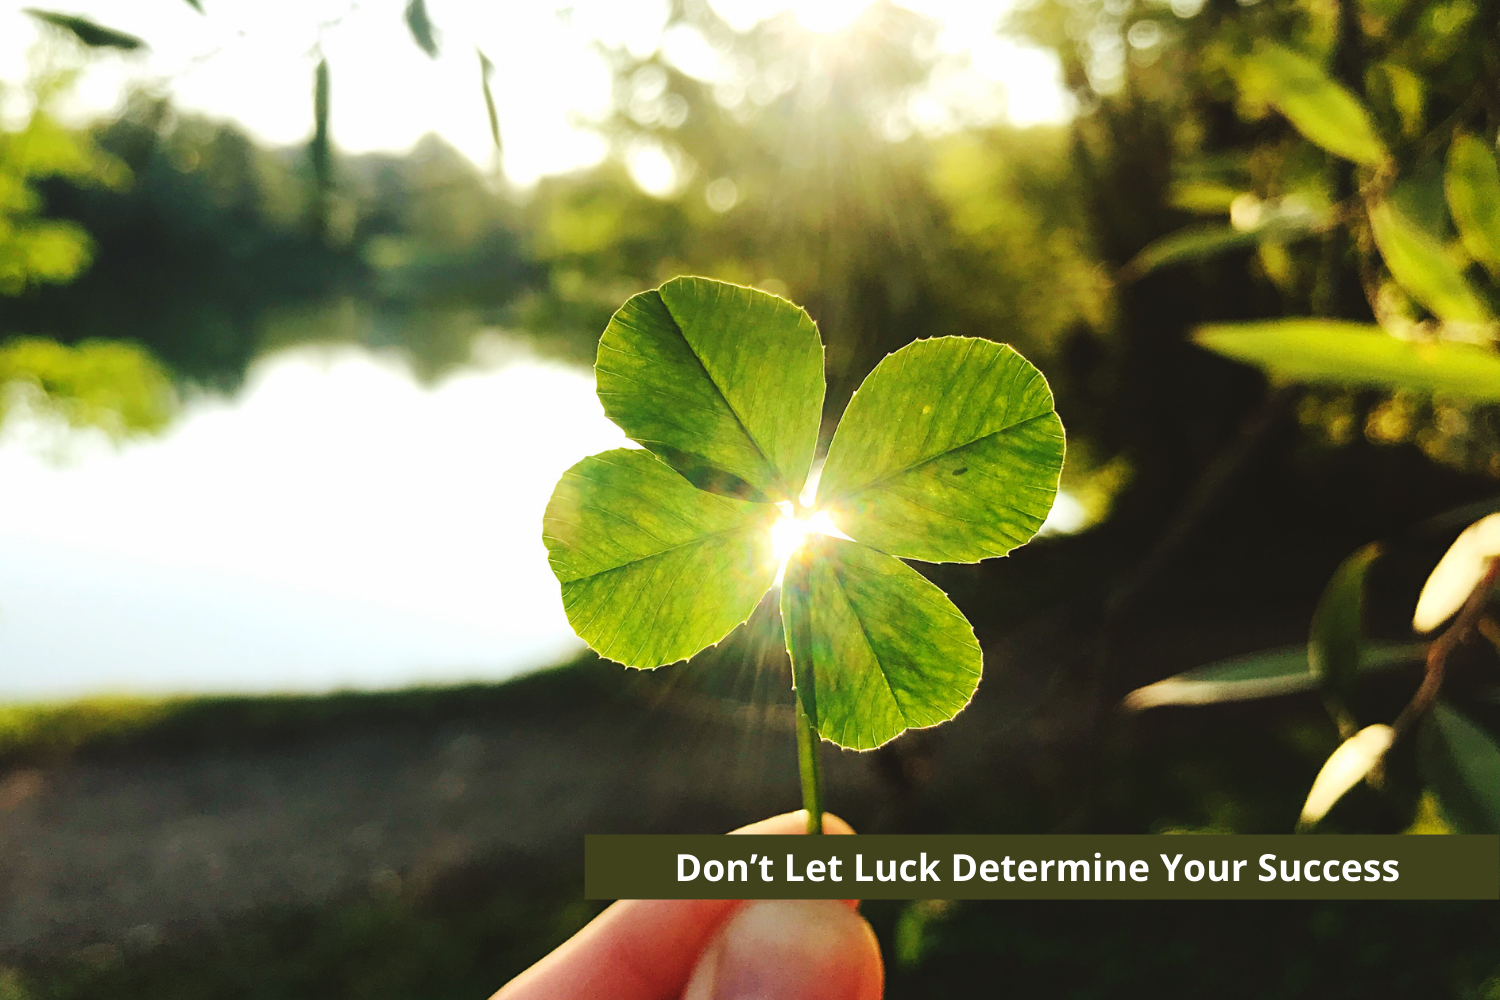 Quick Win – Don’t Let Luck Determine Your Success